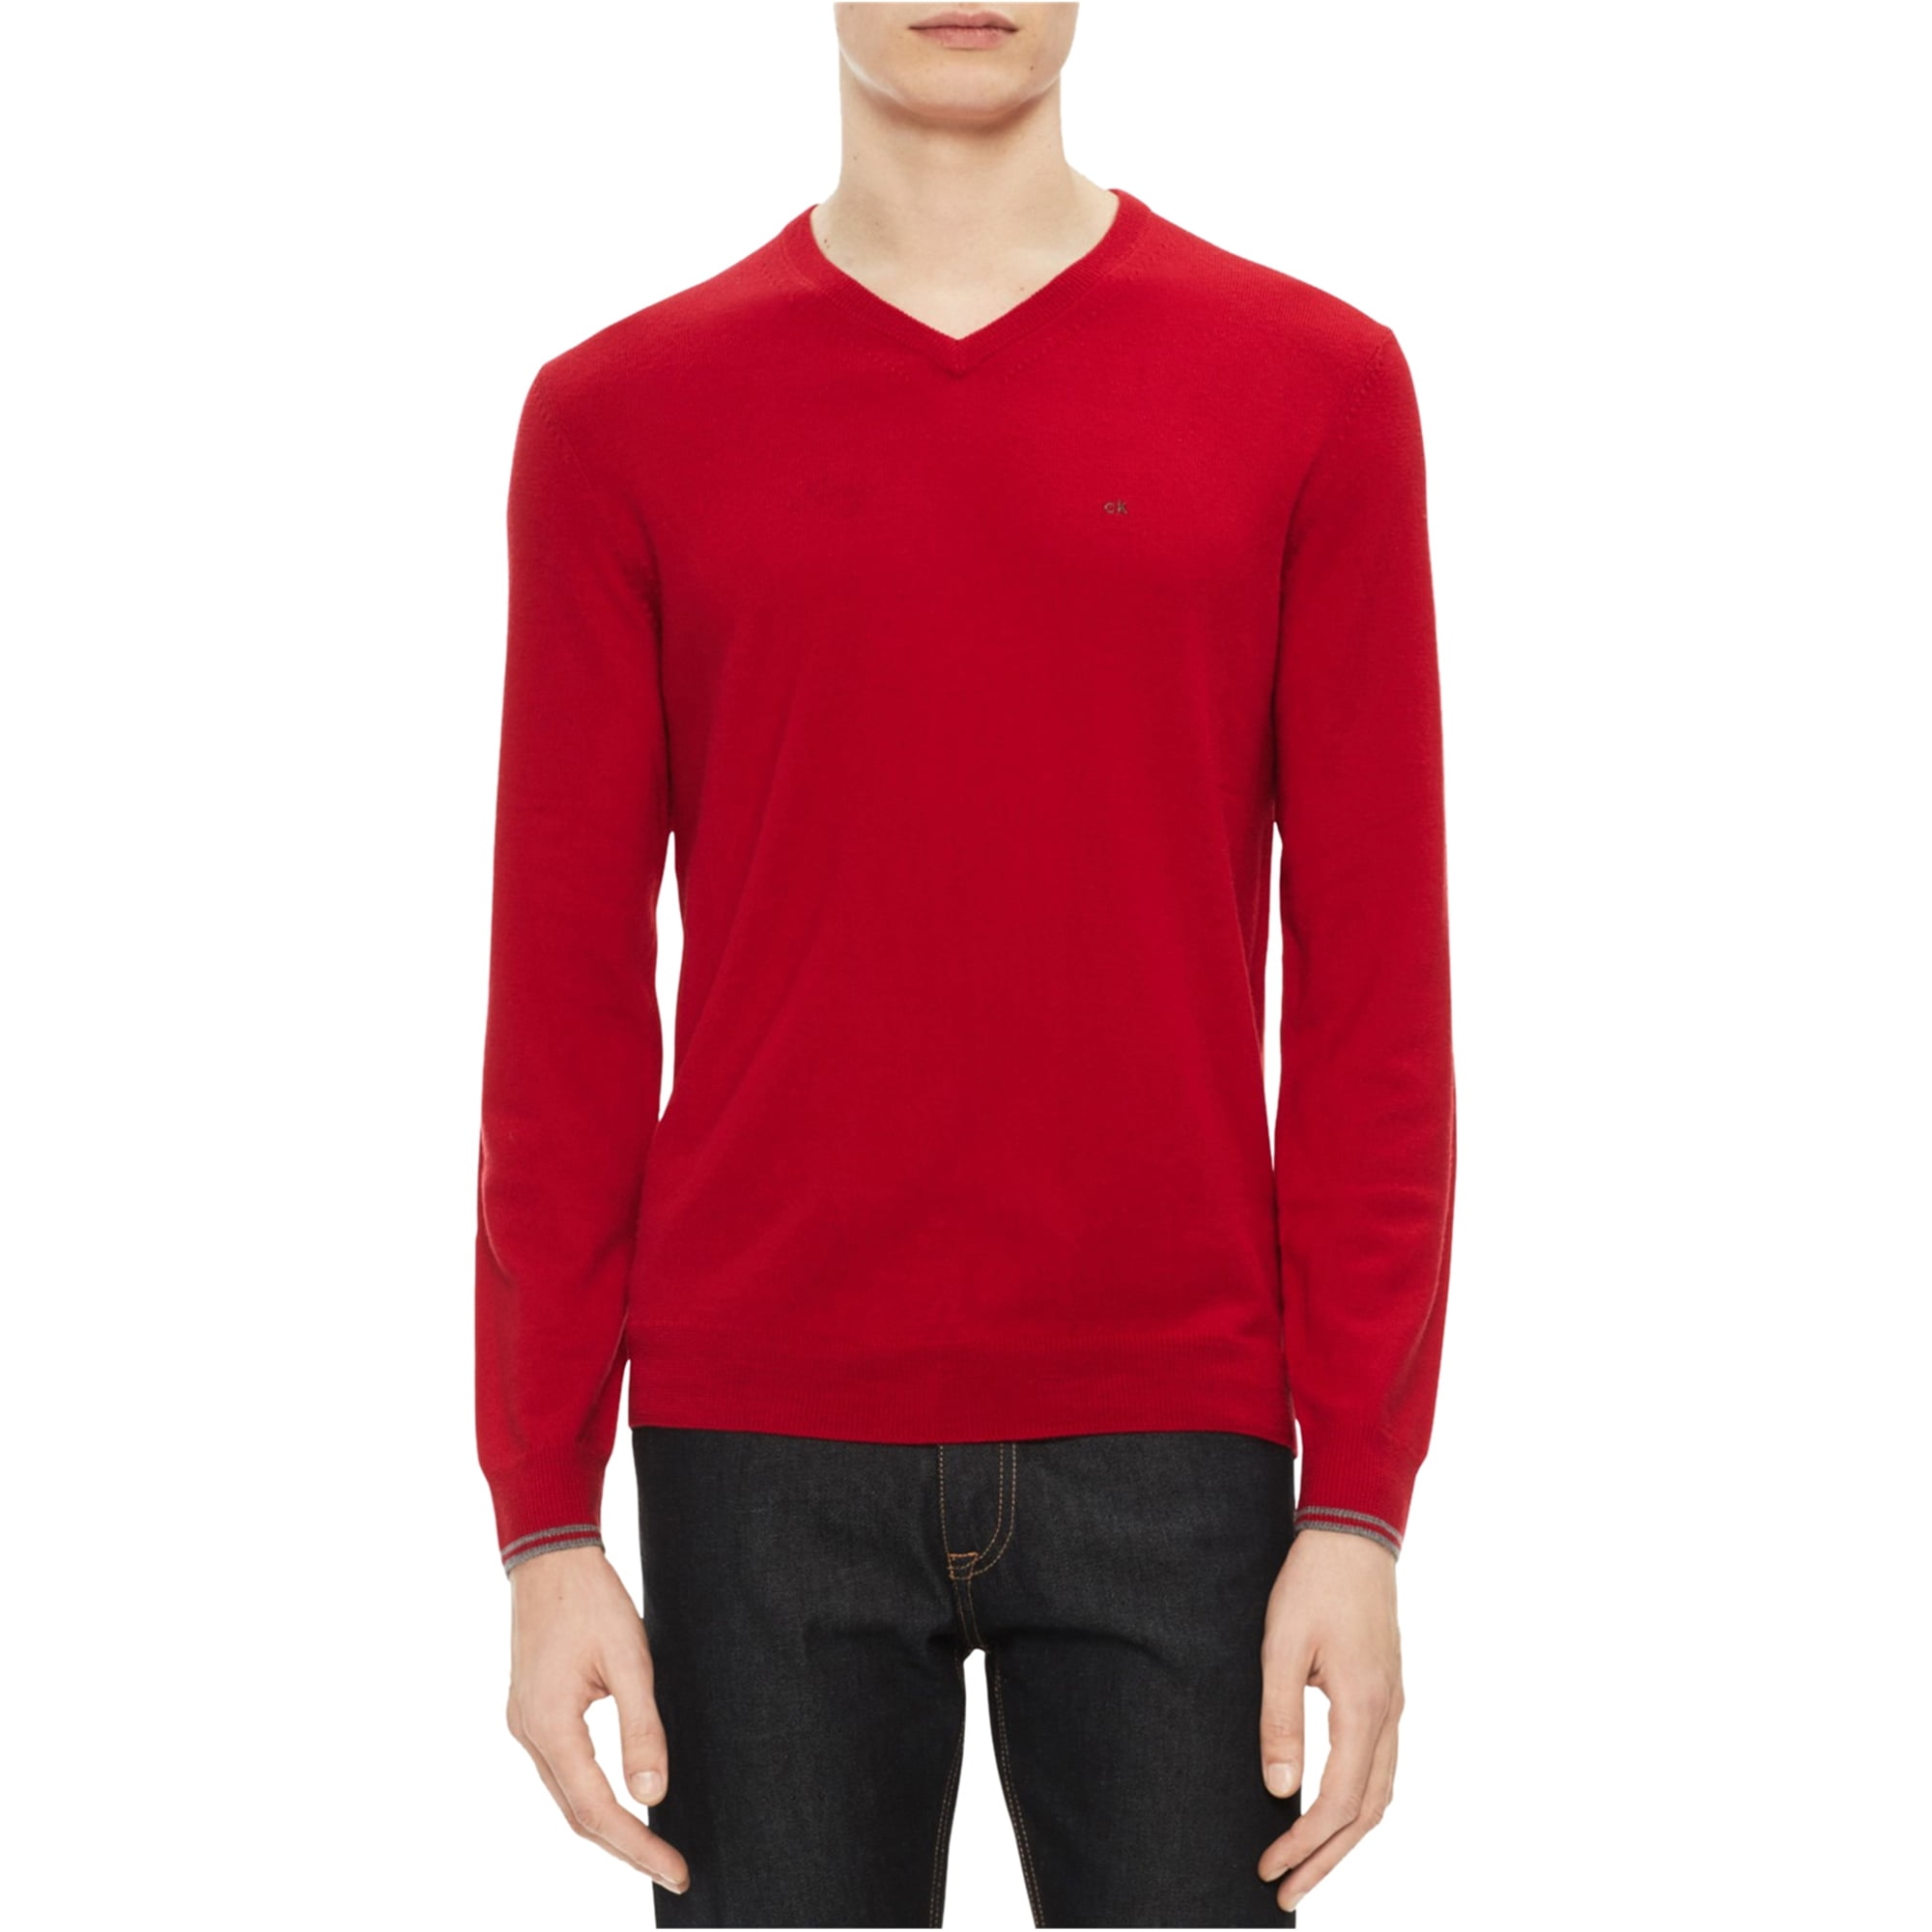 Calvin Klein Mens Extra Fine Merino Pullover Sweater, Red, XX-Large -  